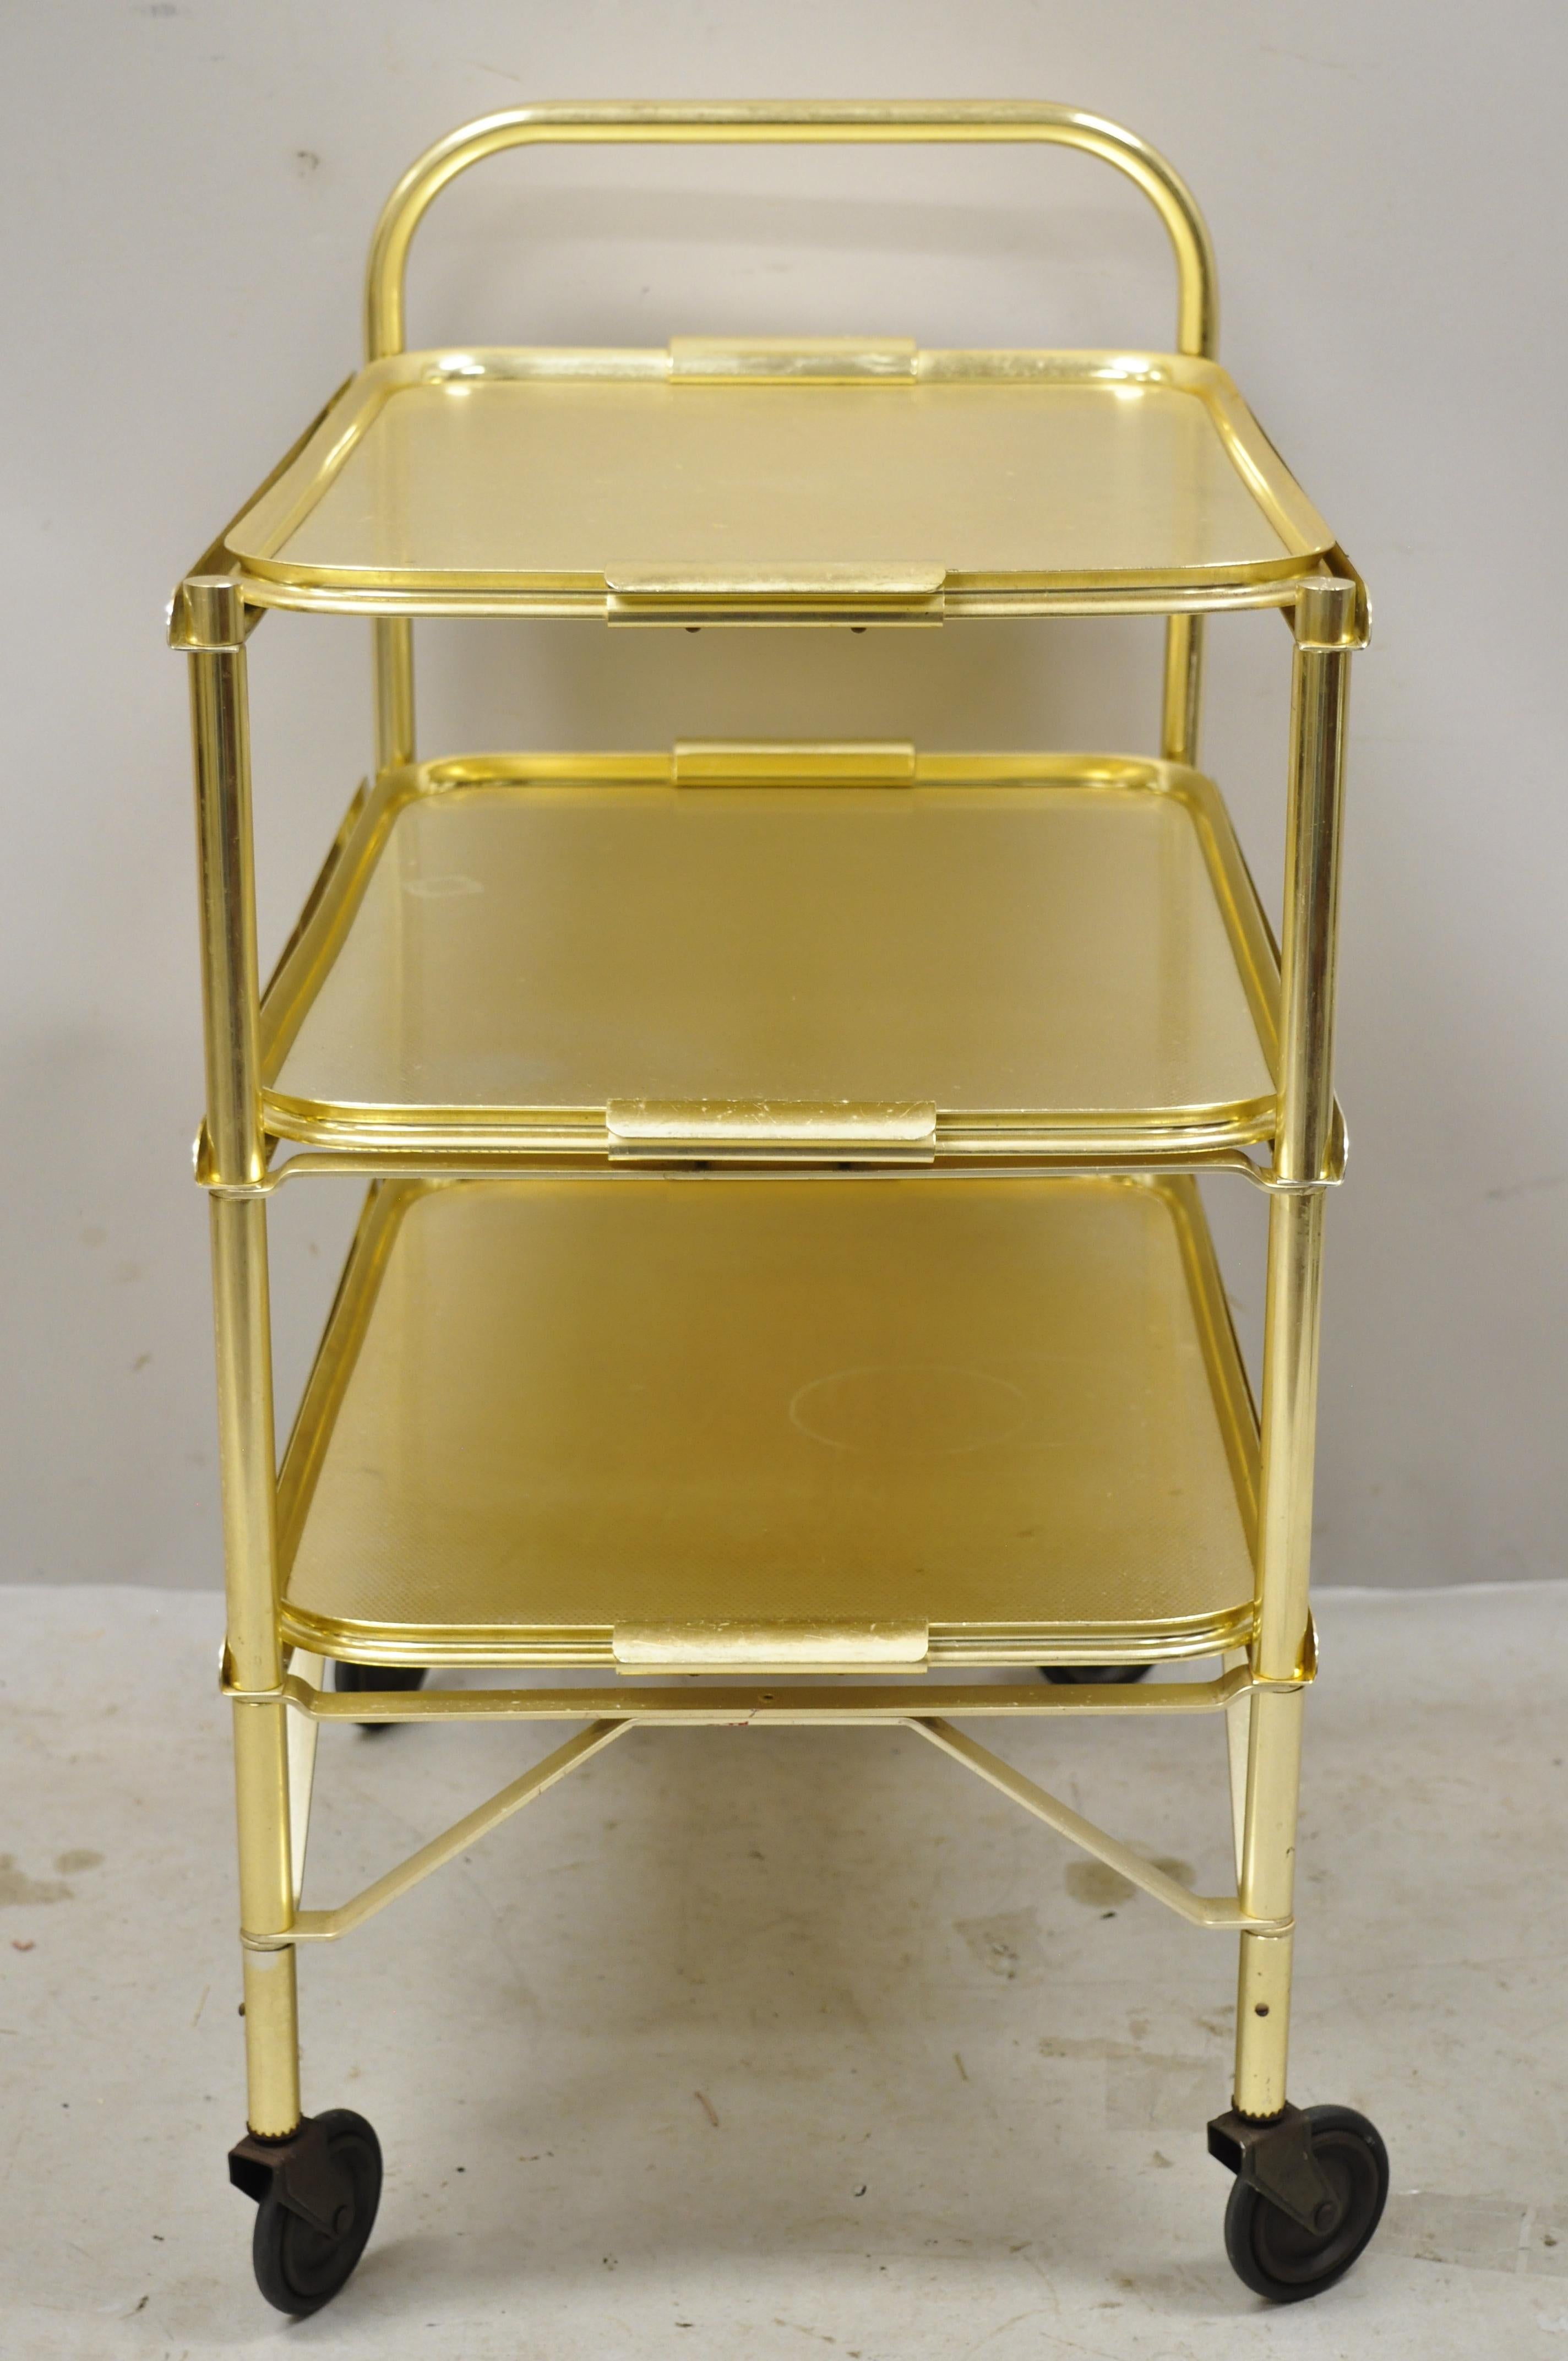 Midcentury Gold Aluminum Metal Folding Rolling Bar Cart Server with 3 Trays For Sale 2